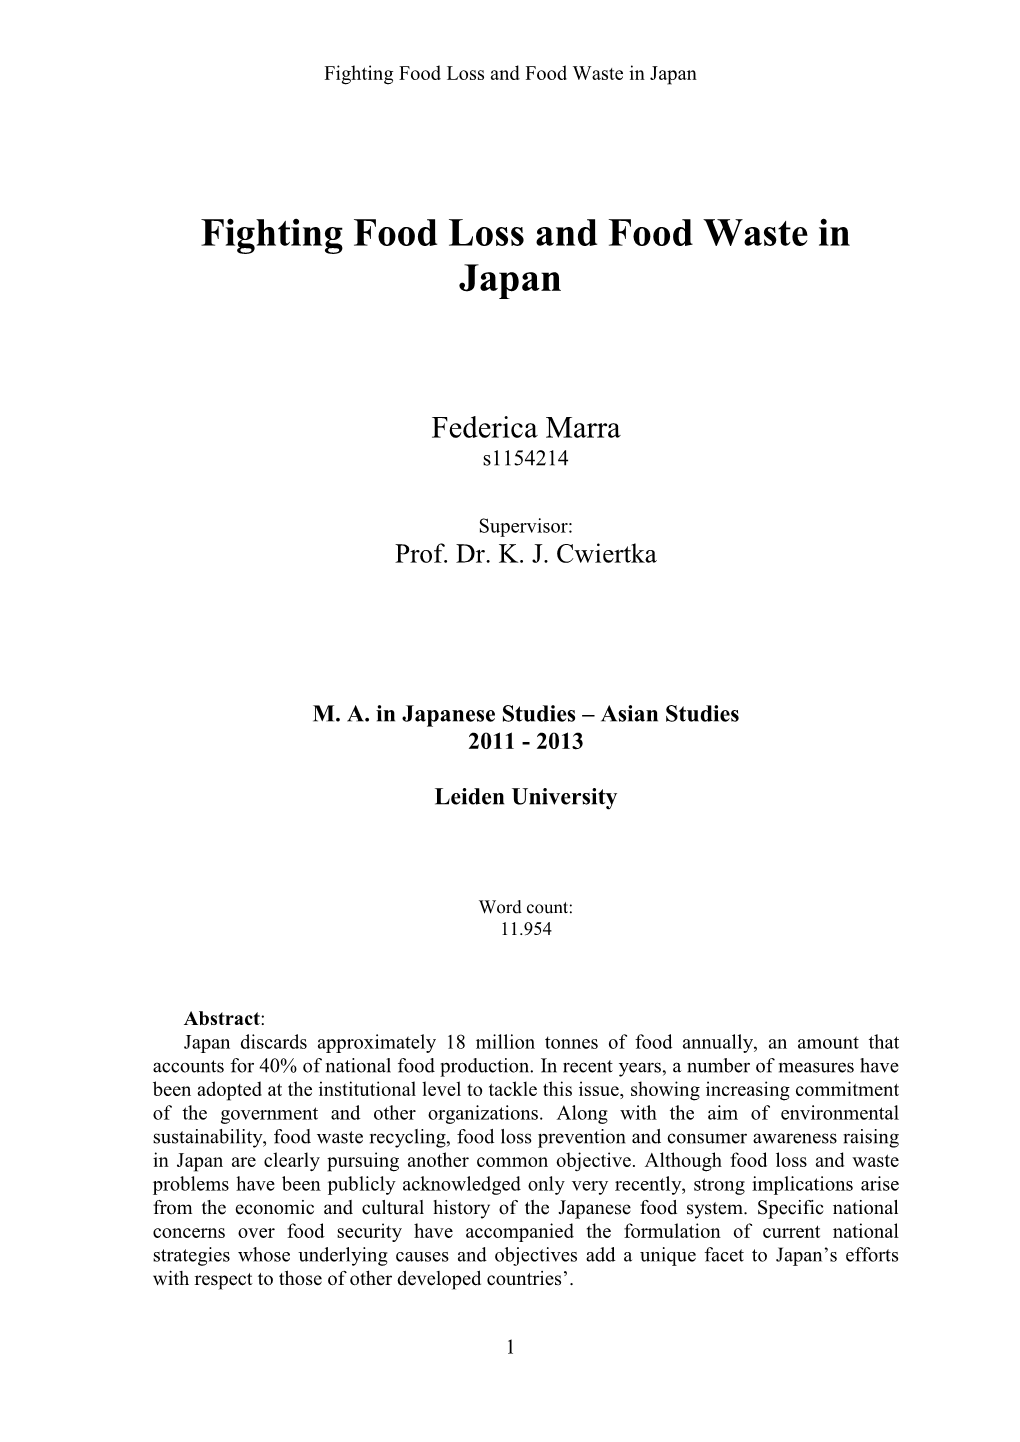 fighting-food-loss-and-food-waste-in-japan-docslib